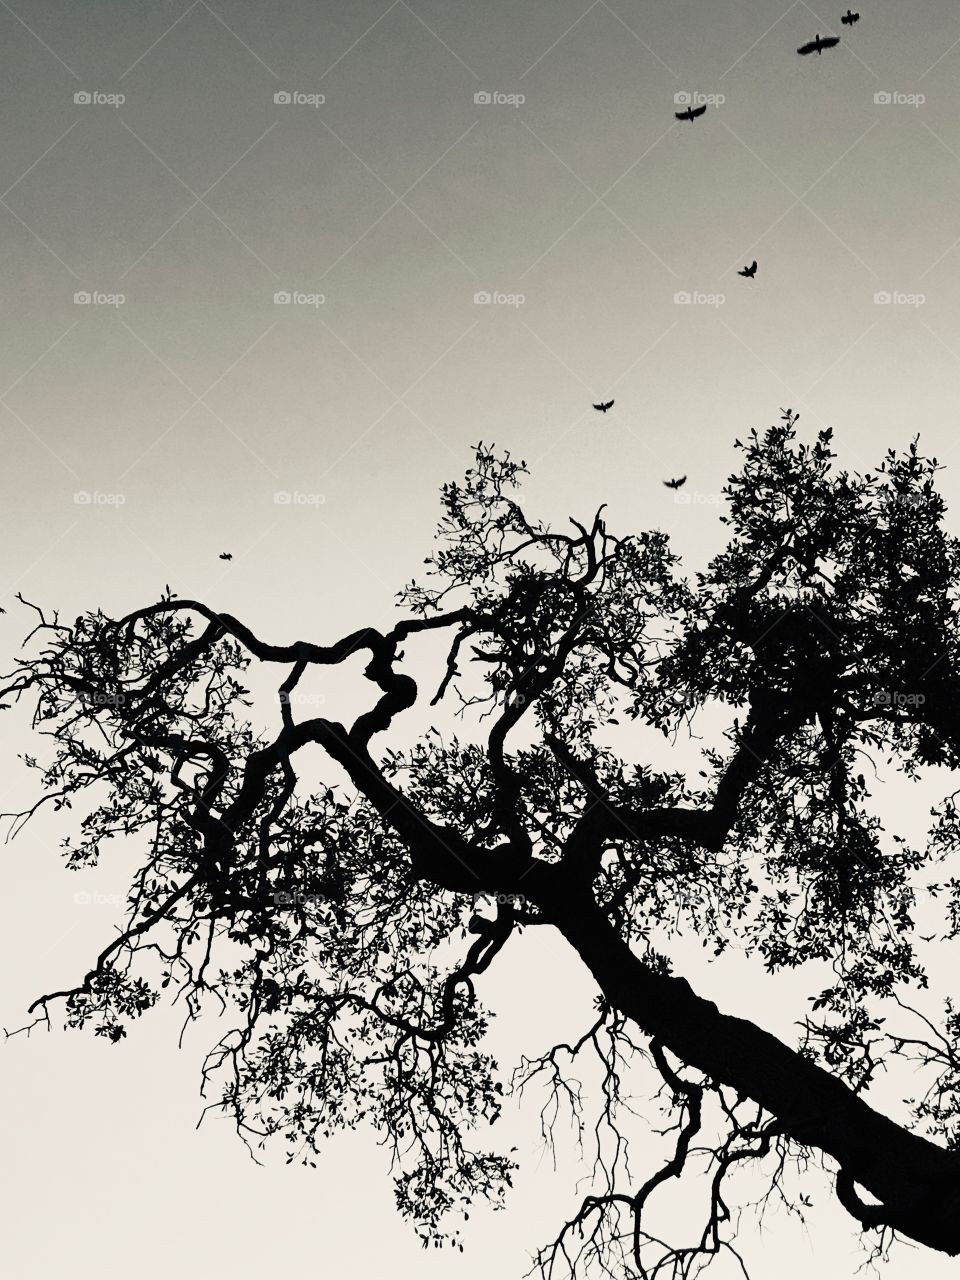 Birds flying over a tree